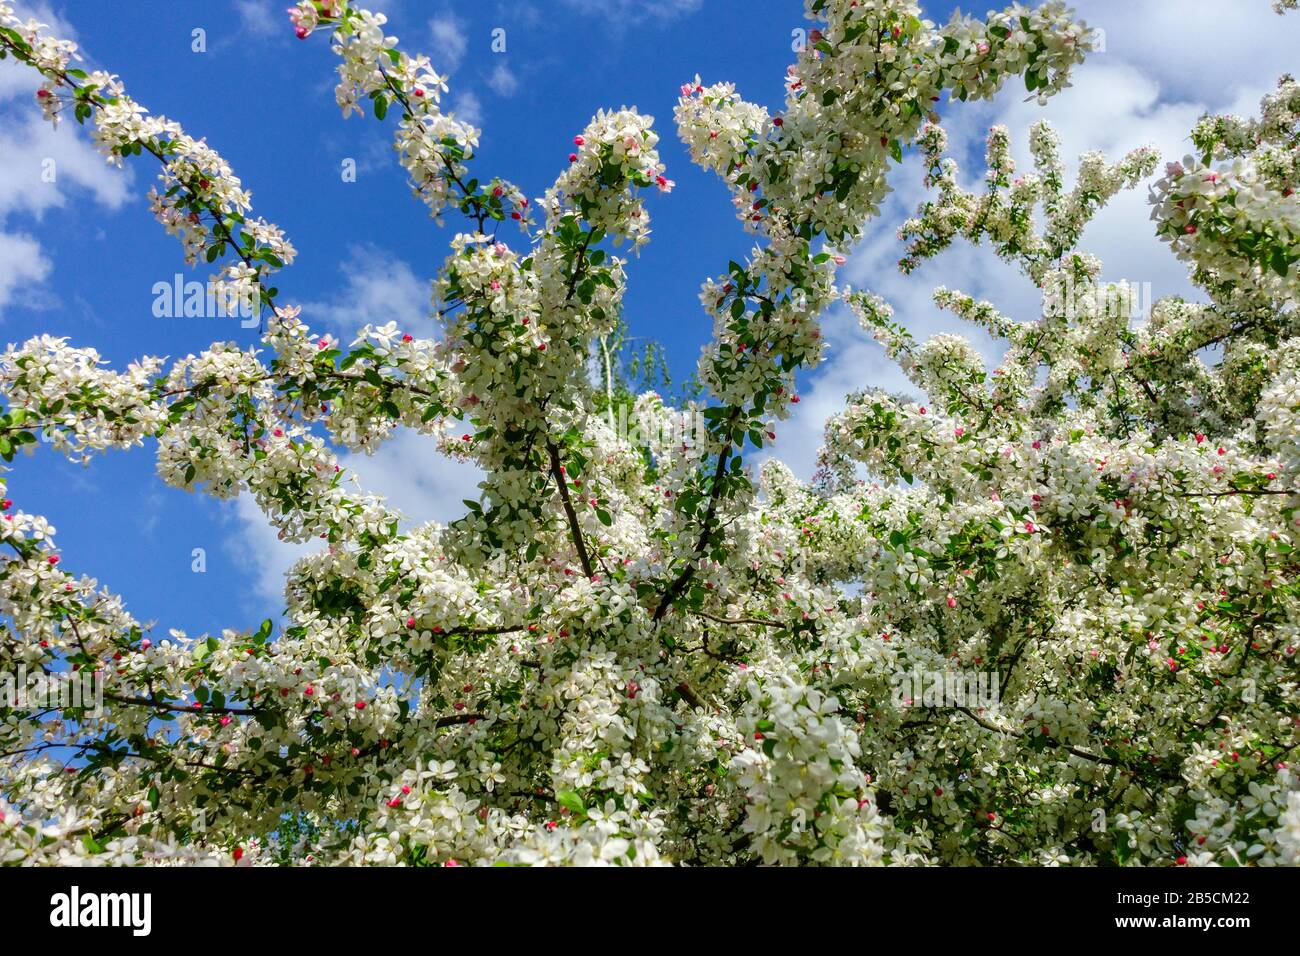 Spring tree in bloom, apple tree blossoms against blue sky in sunny day Stock Photo